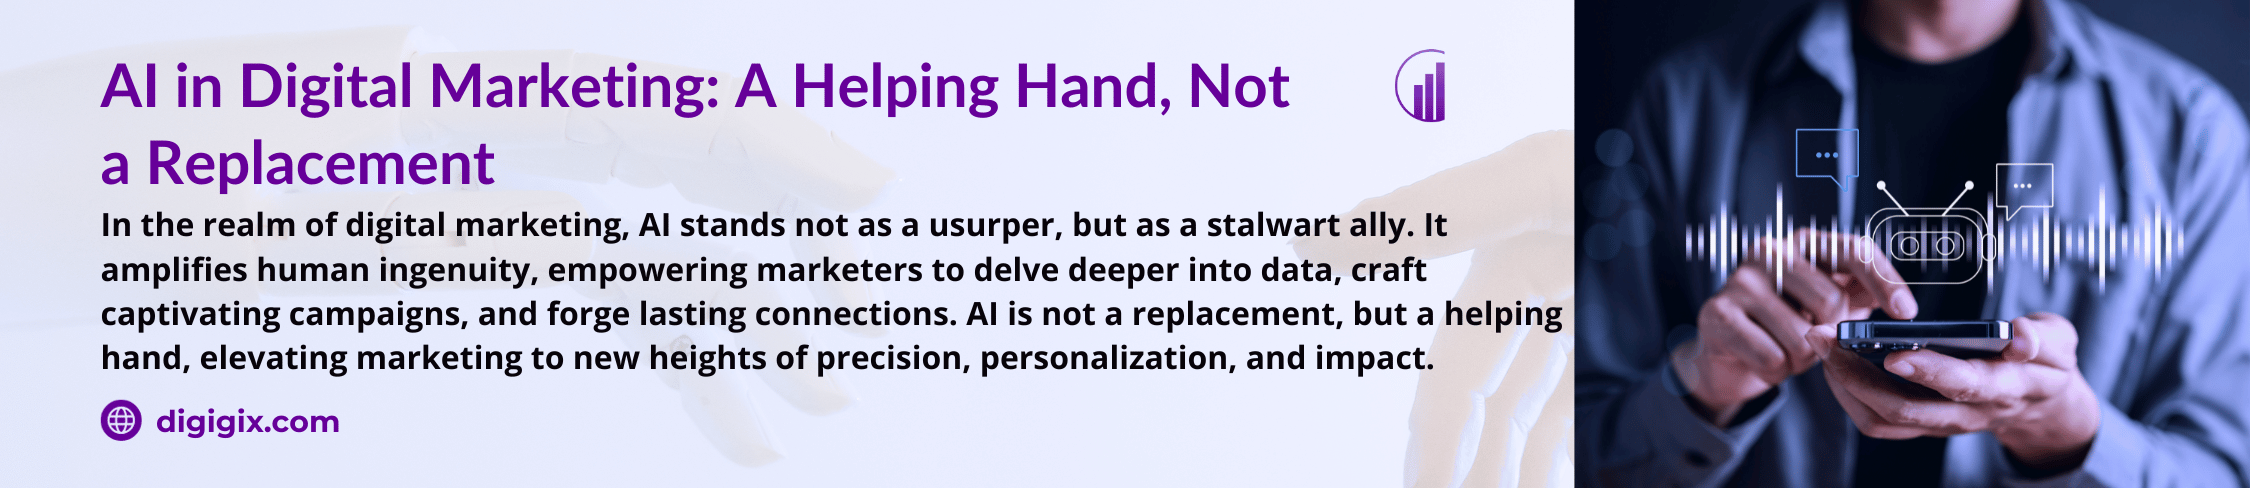 AI in Digital Marketing: A Helping Hand, Not a Replacement